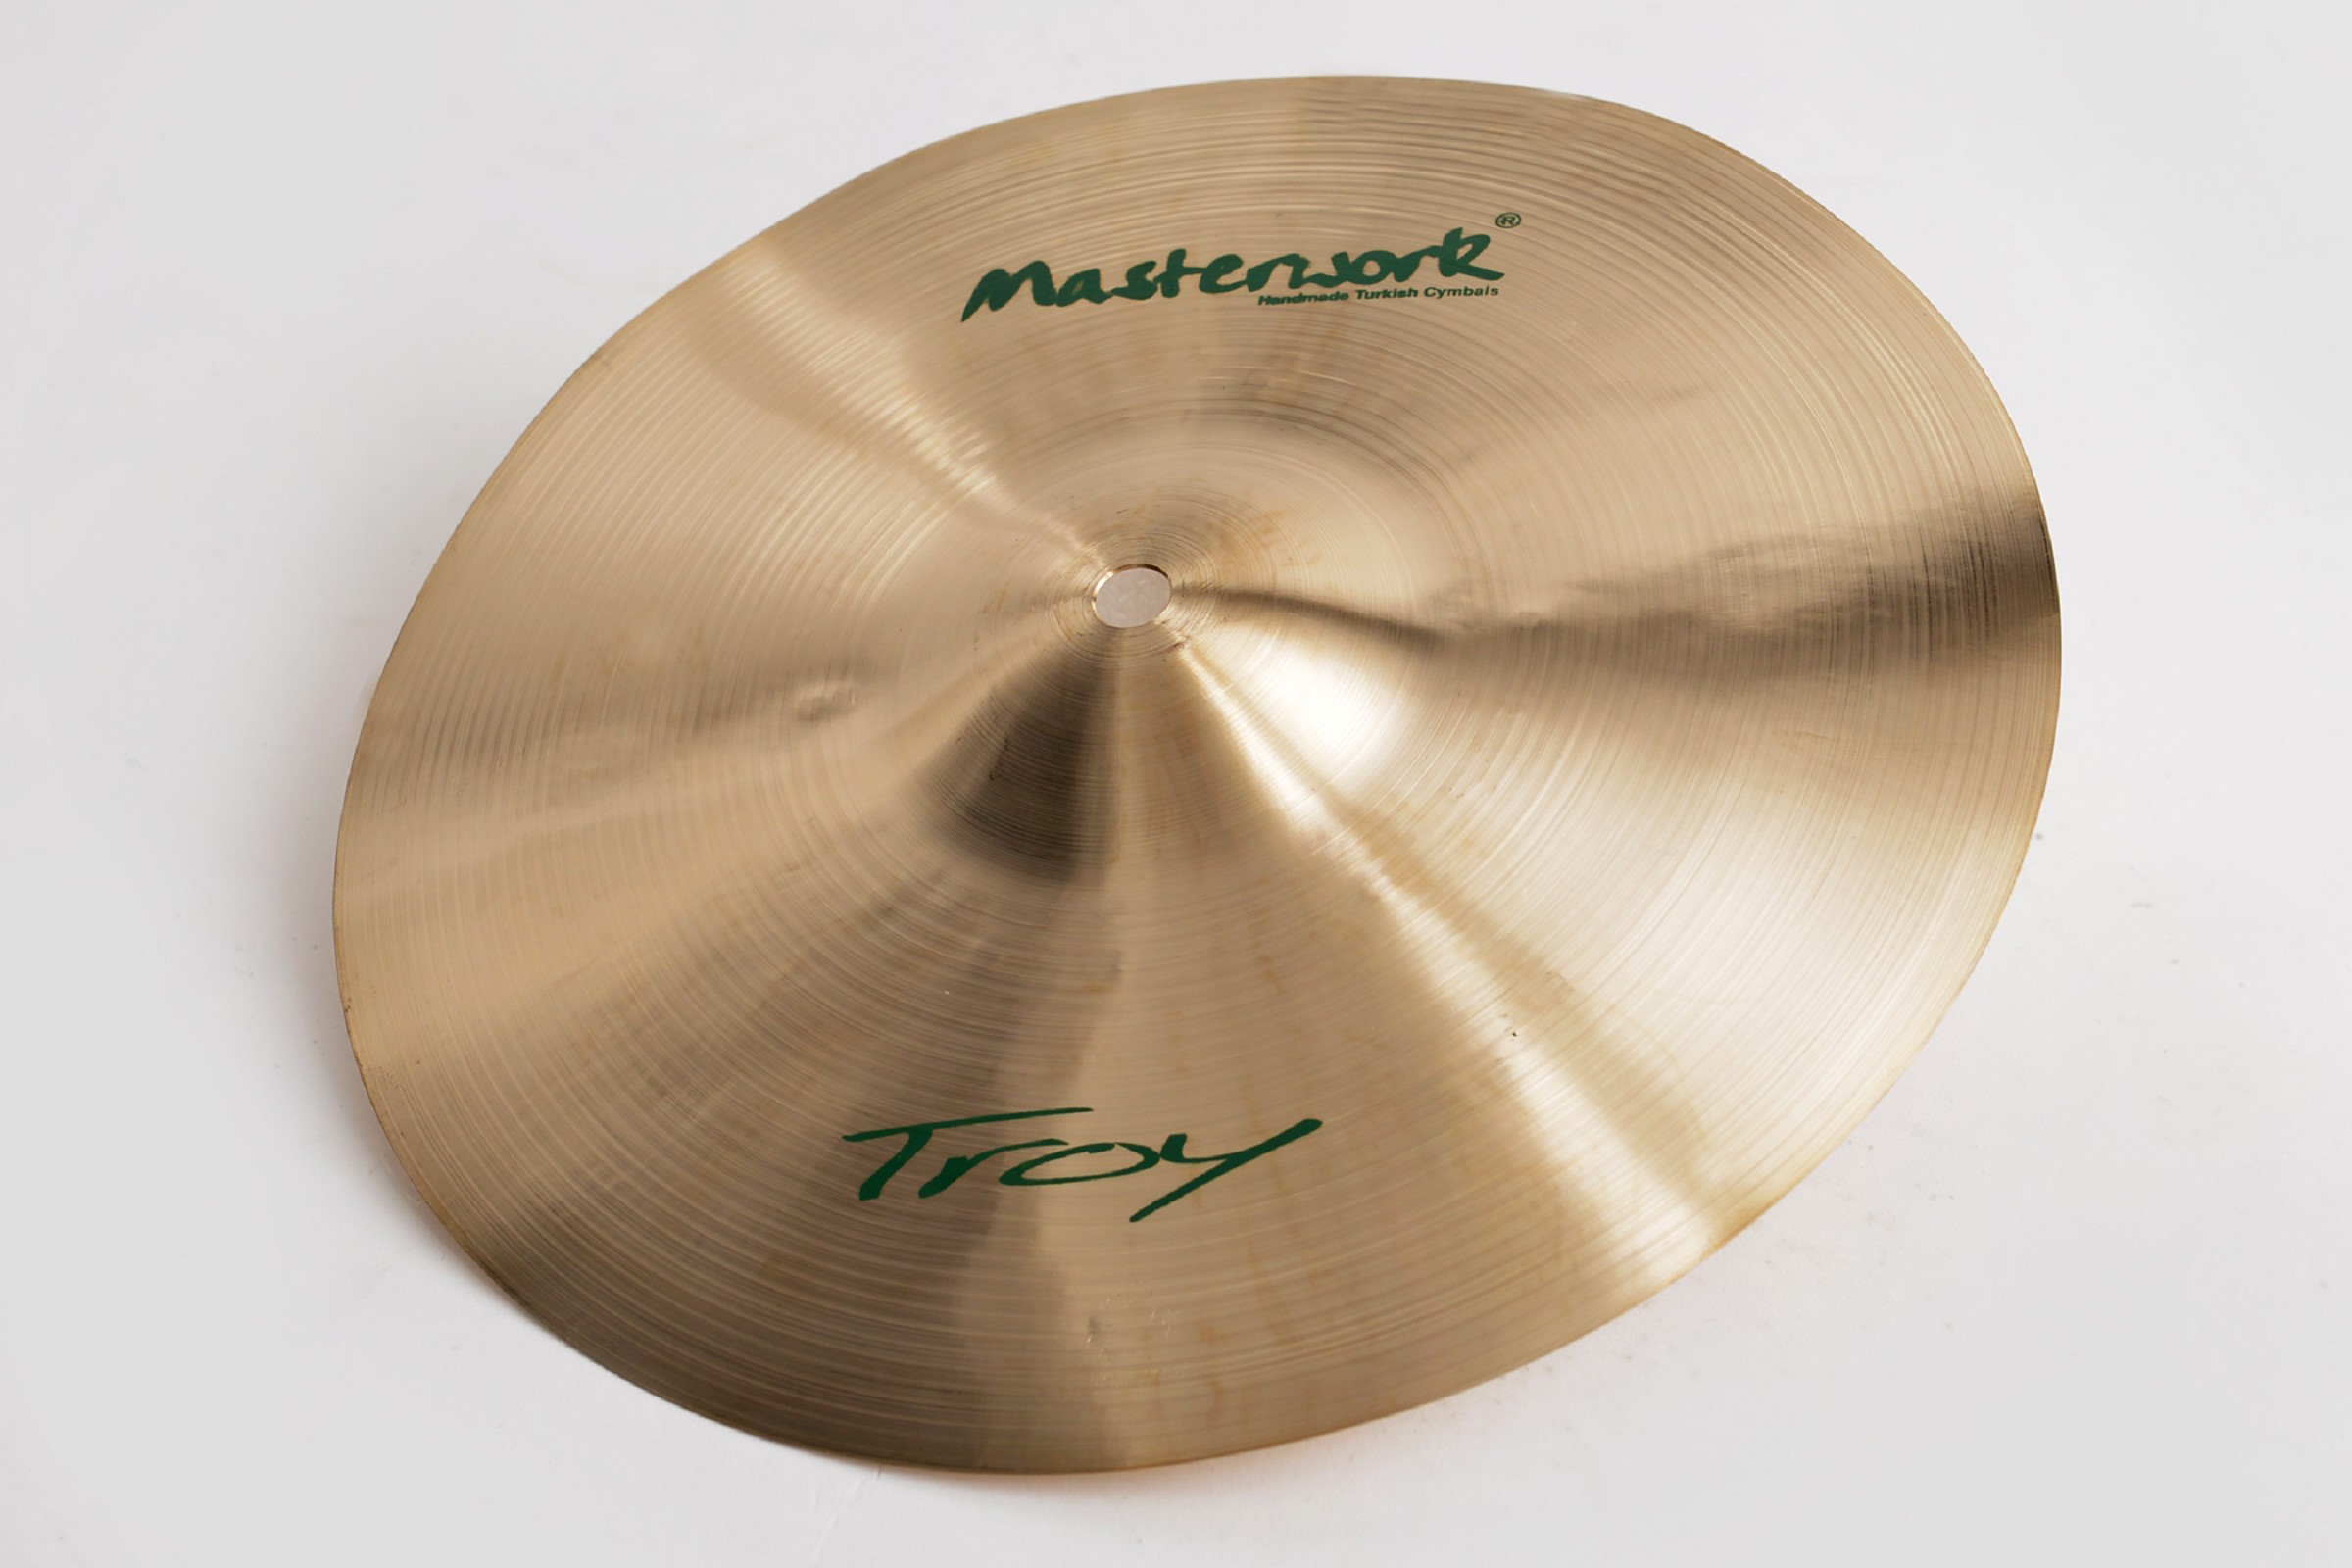 Masterwork Troy Percussion Series 12" Handcymbal